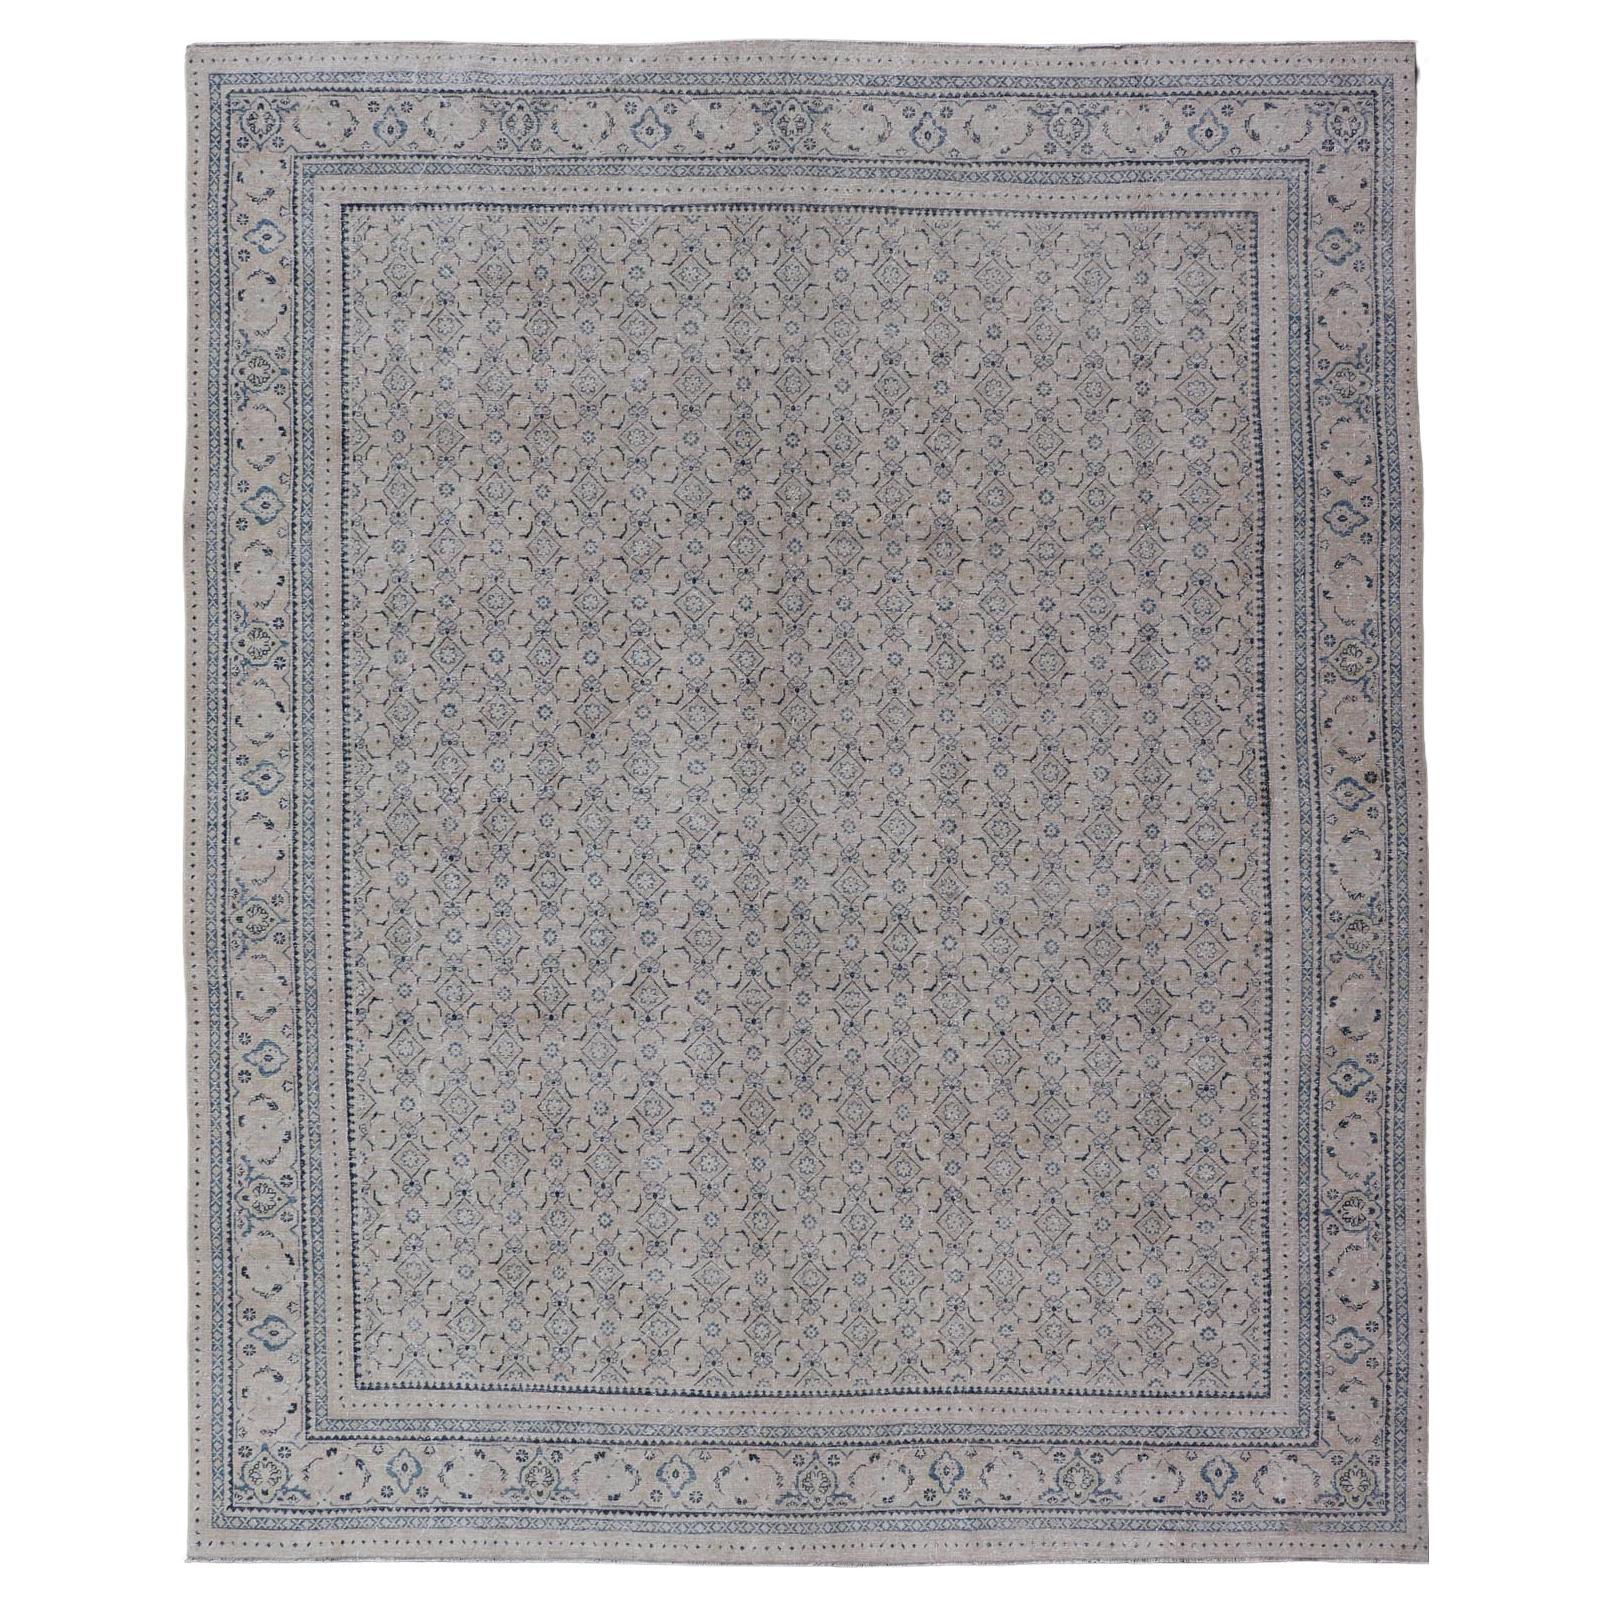 Antique Persian Tabriz Rug with All-Over Small Tribal Design in Muted Tones